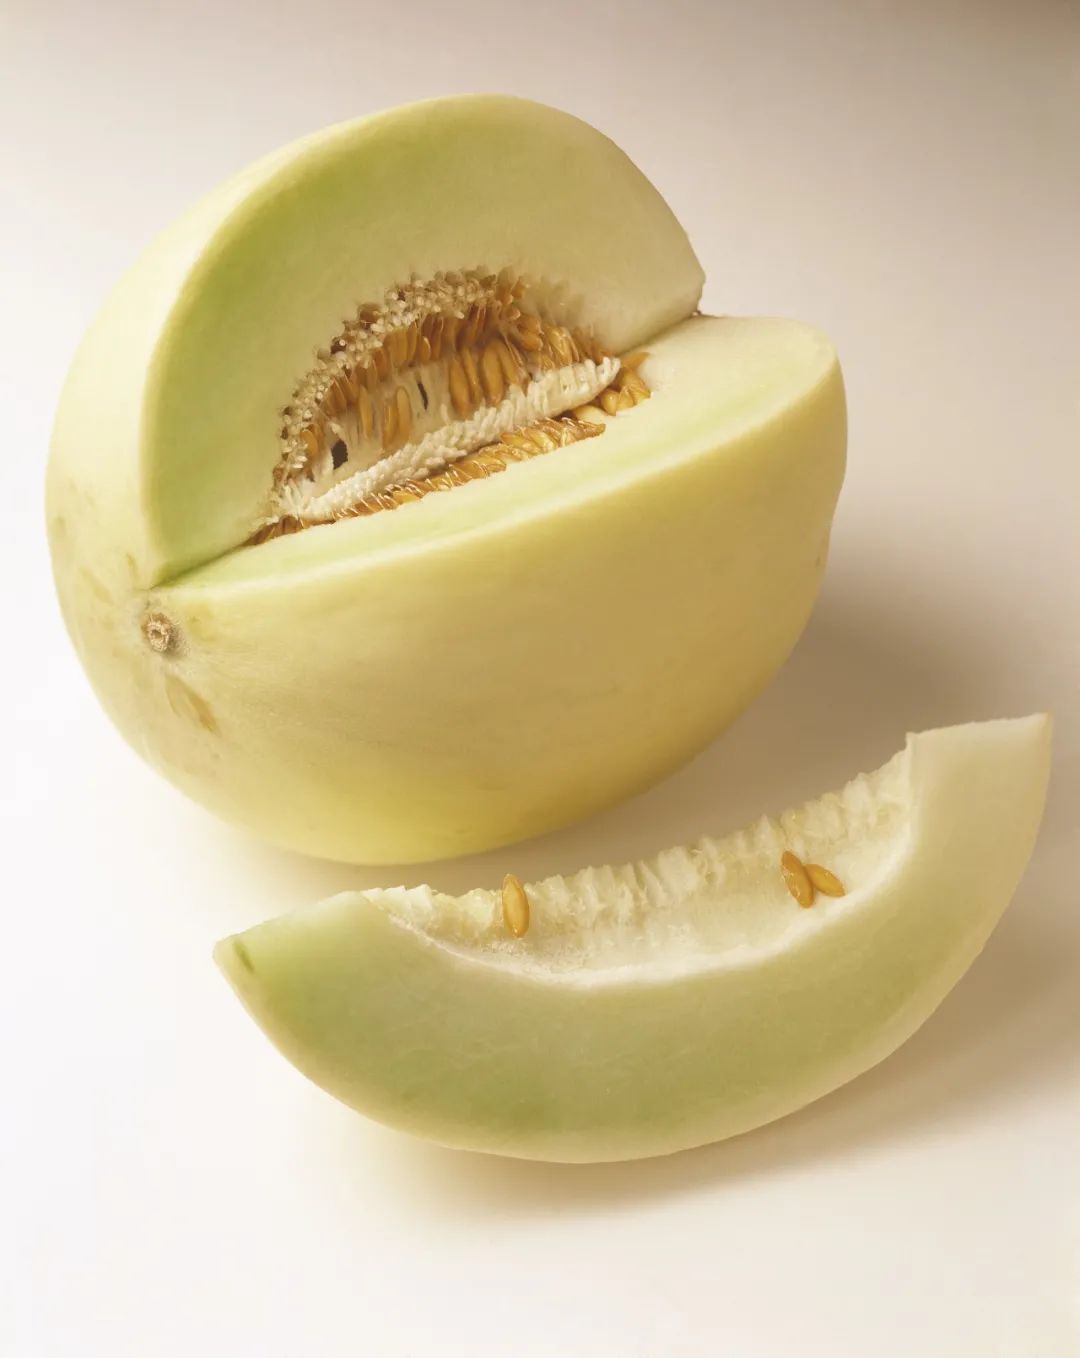 Honeydew vs Cantaloupe: What’s the Difference? - A-Z Animals